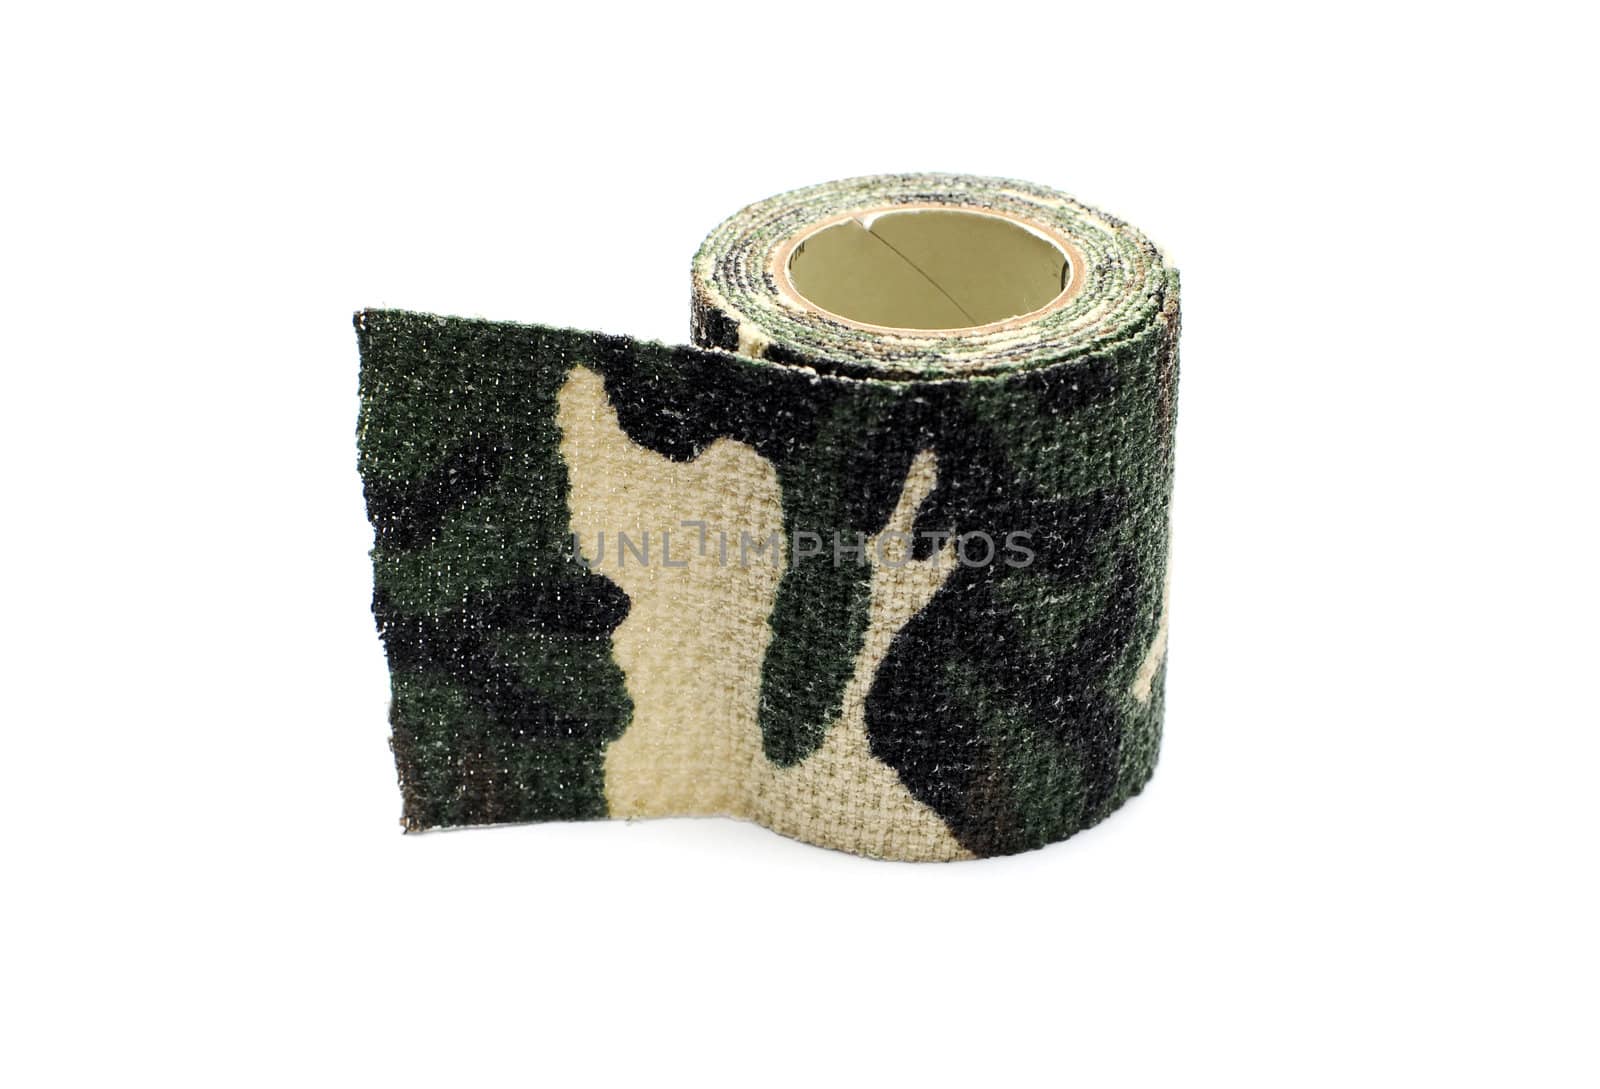 Roll of fabric camouflage tape on a white background